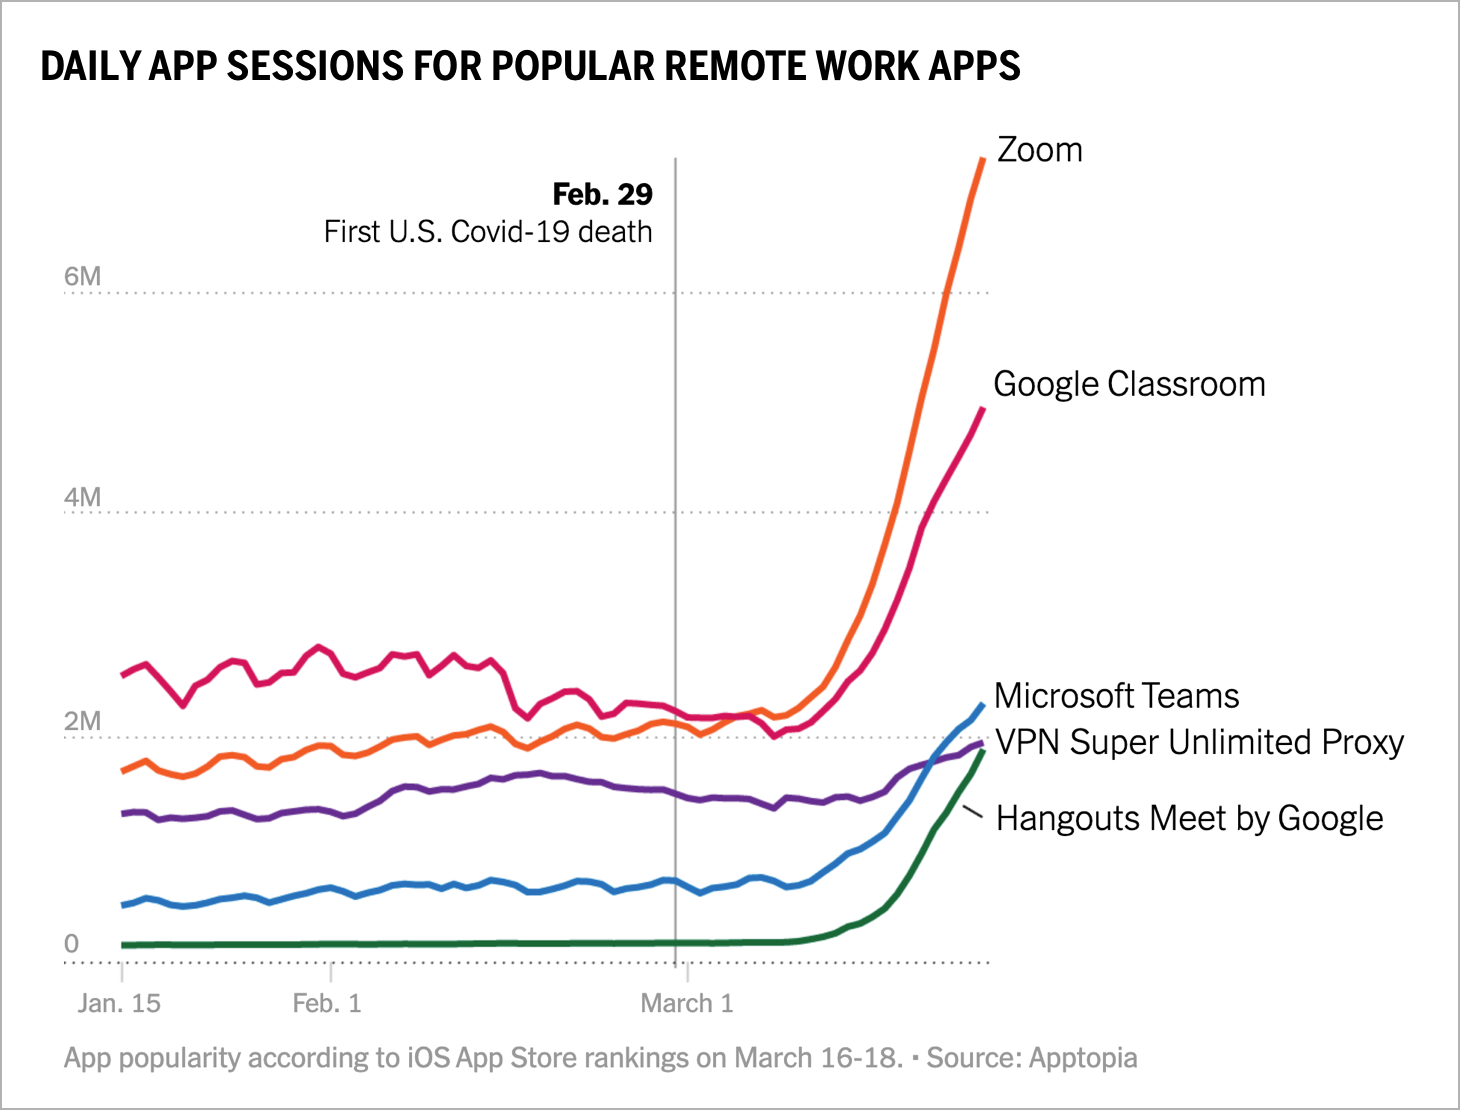 Daily App Sessions for Popular Remote Work Apps